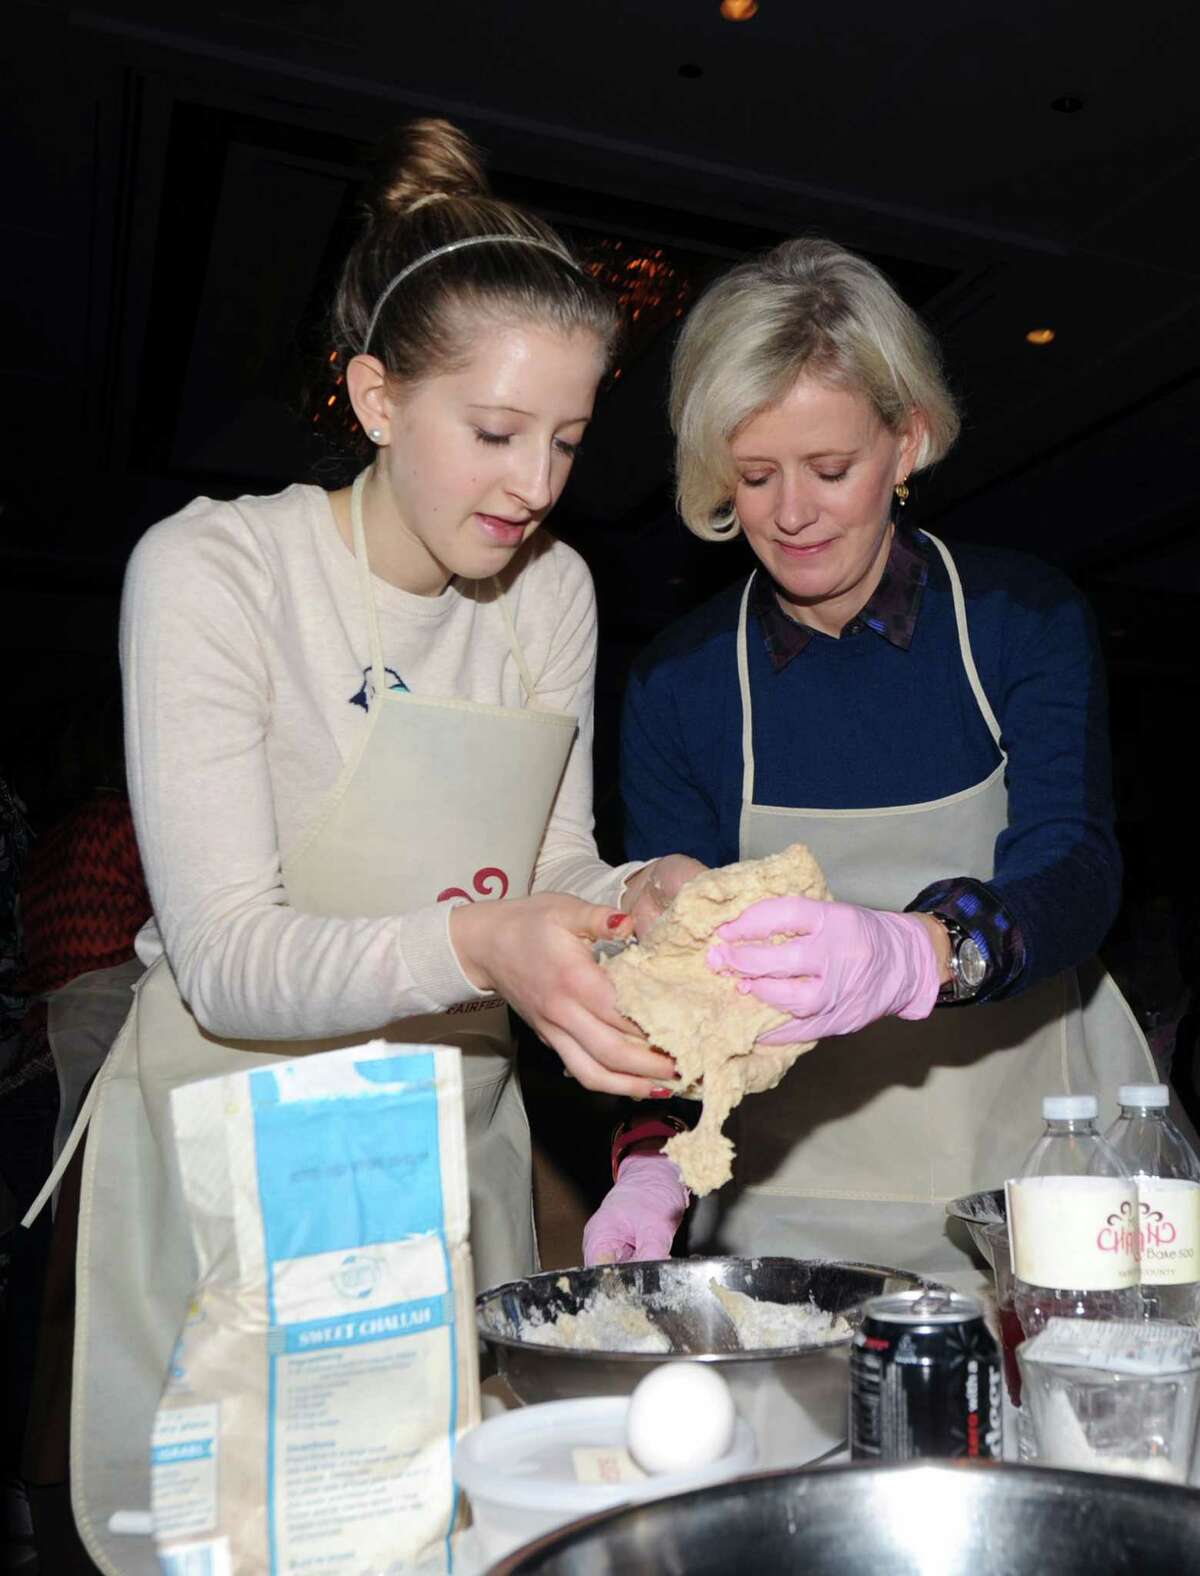 Below, Sophie Liebergall and her mother, Anne Liebergall, of New Canaan, knead challah dough together.